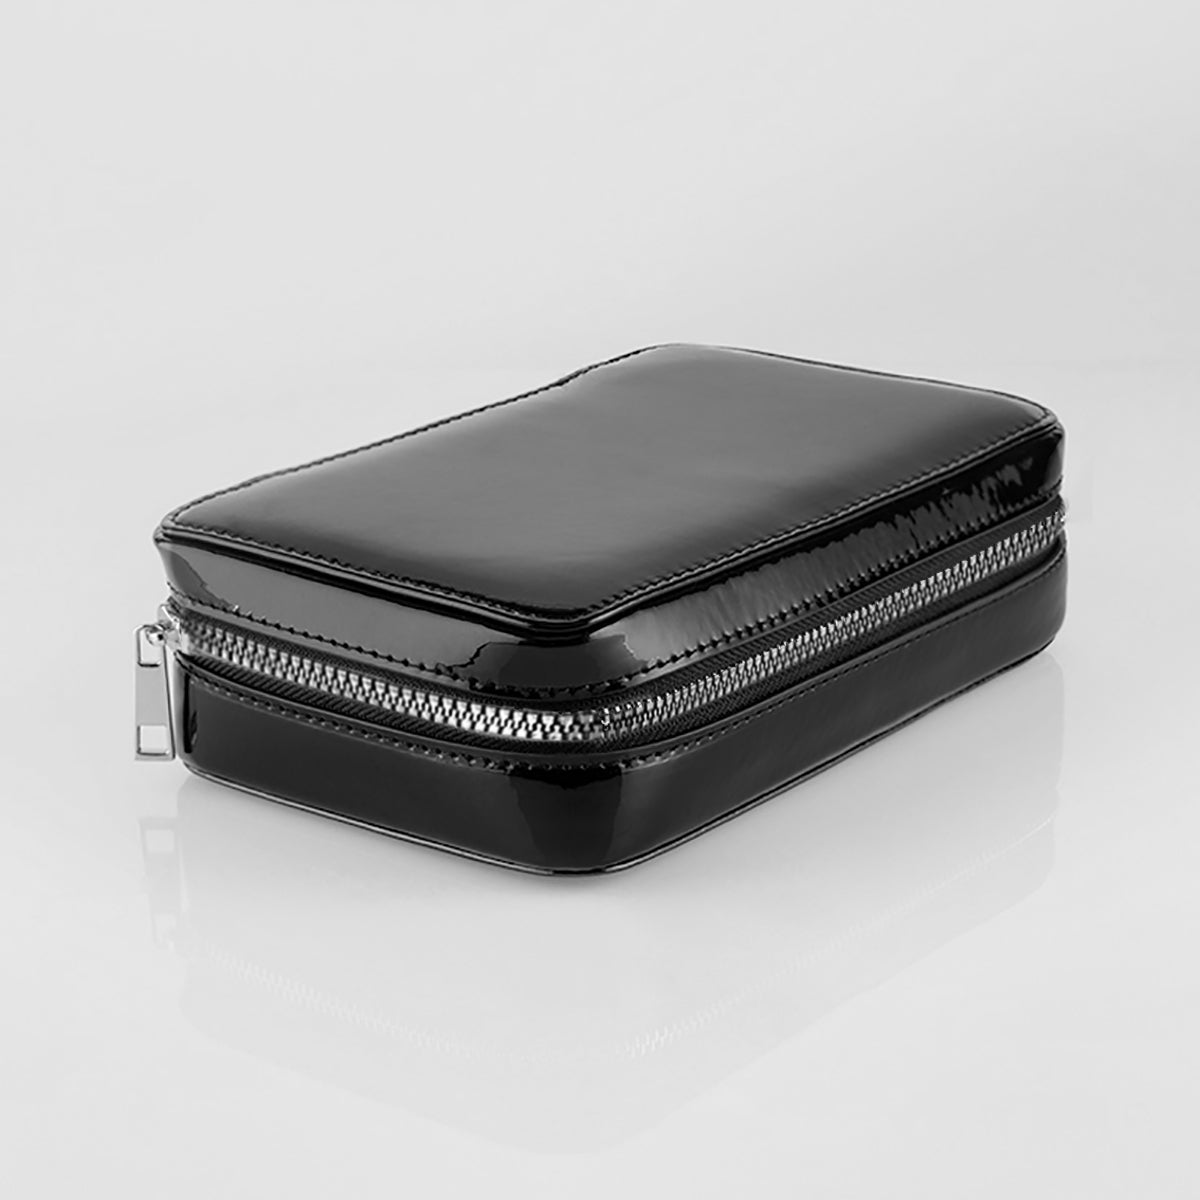 The fold out case shown closed and in black with silver zipper